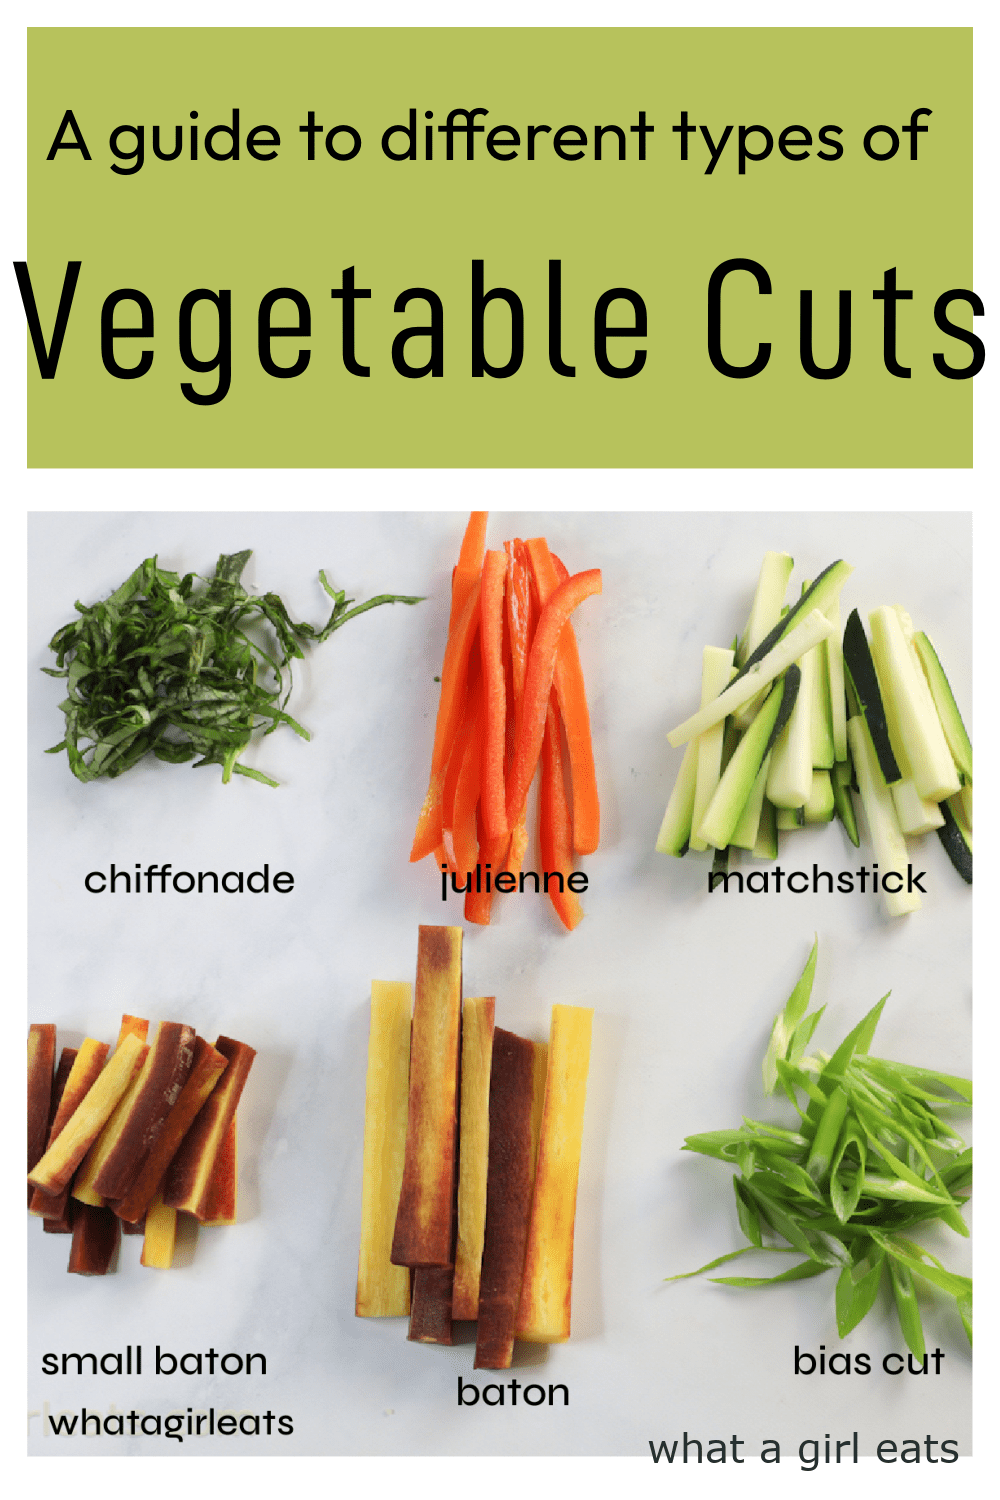 Everything you need to know about the types of vegetable cuts used in cooking from bruoise and chiffonade, to julienne and baton.